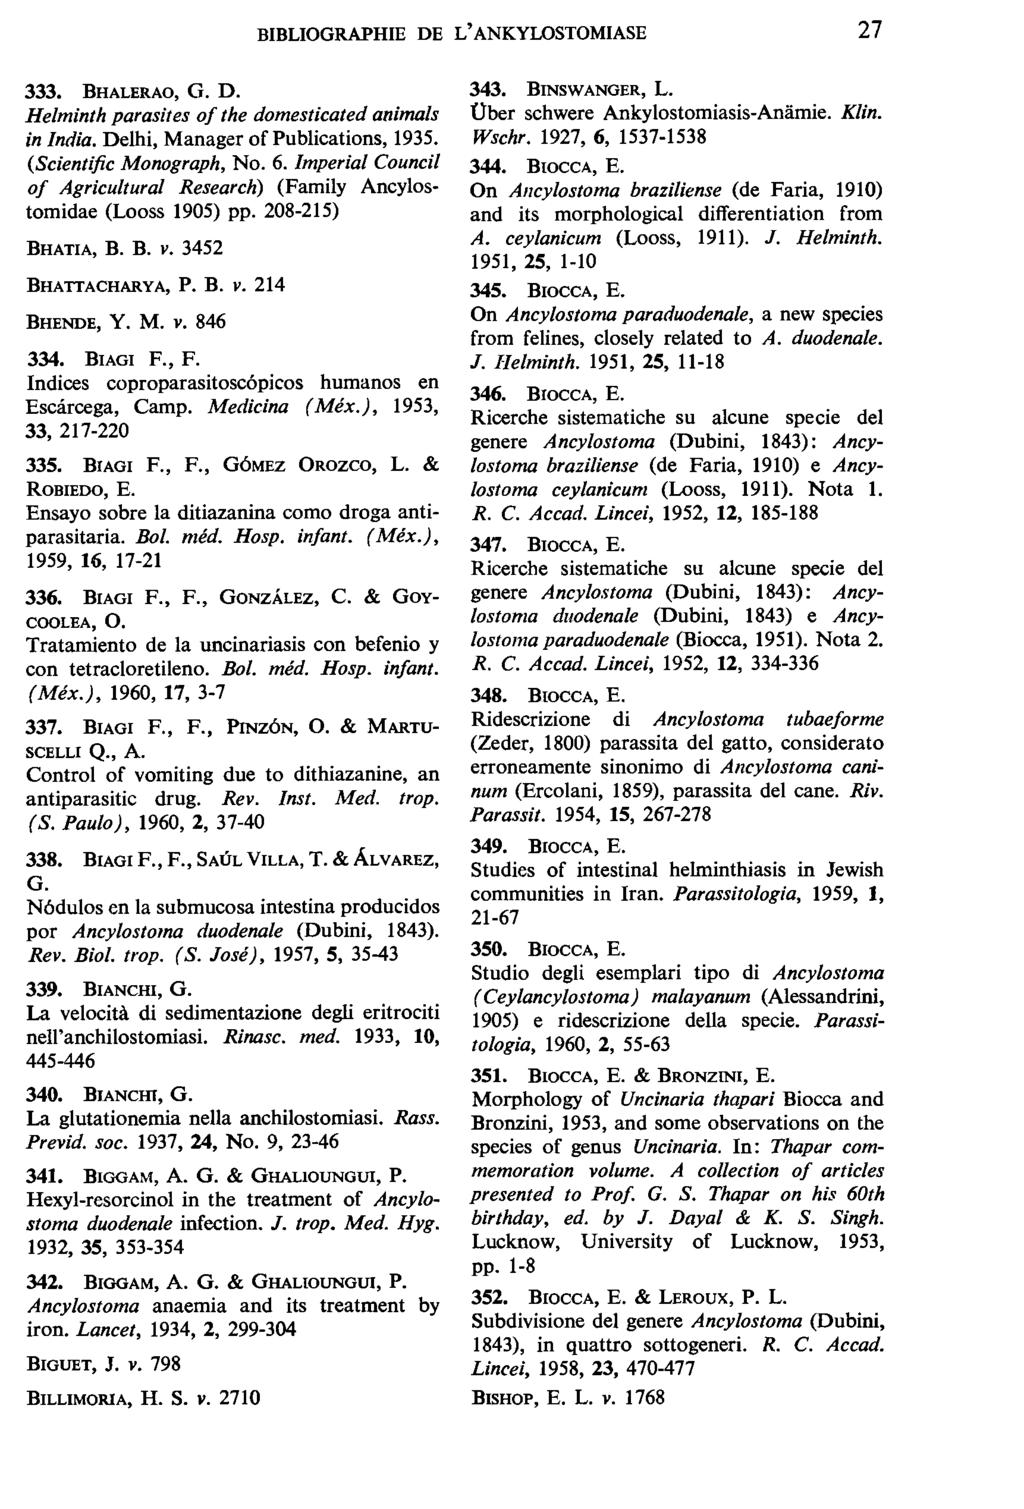 BIBLIOGRAPHIE DE L' ANKYLOSTOMIASE 27 333. BHALERAO, G. D. Helminth parasites of the domesticated animals in India. Delhi, Manager of Publications, 1935. (Scientific Monograph, No. 6.